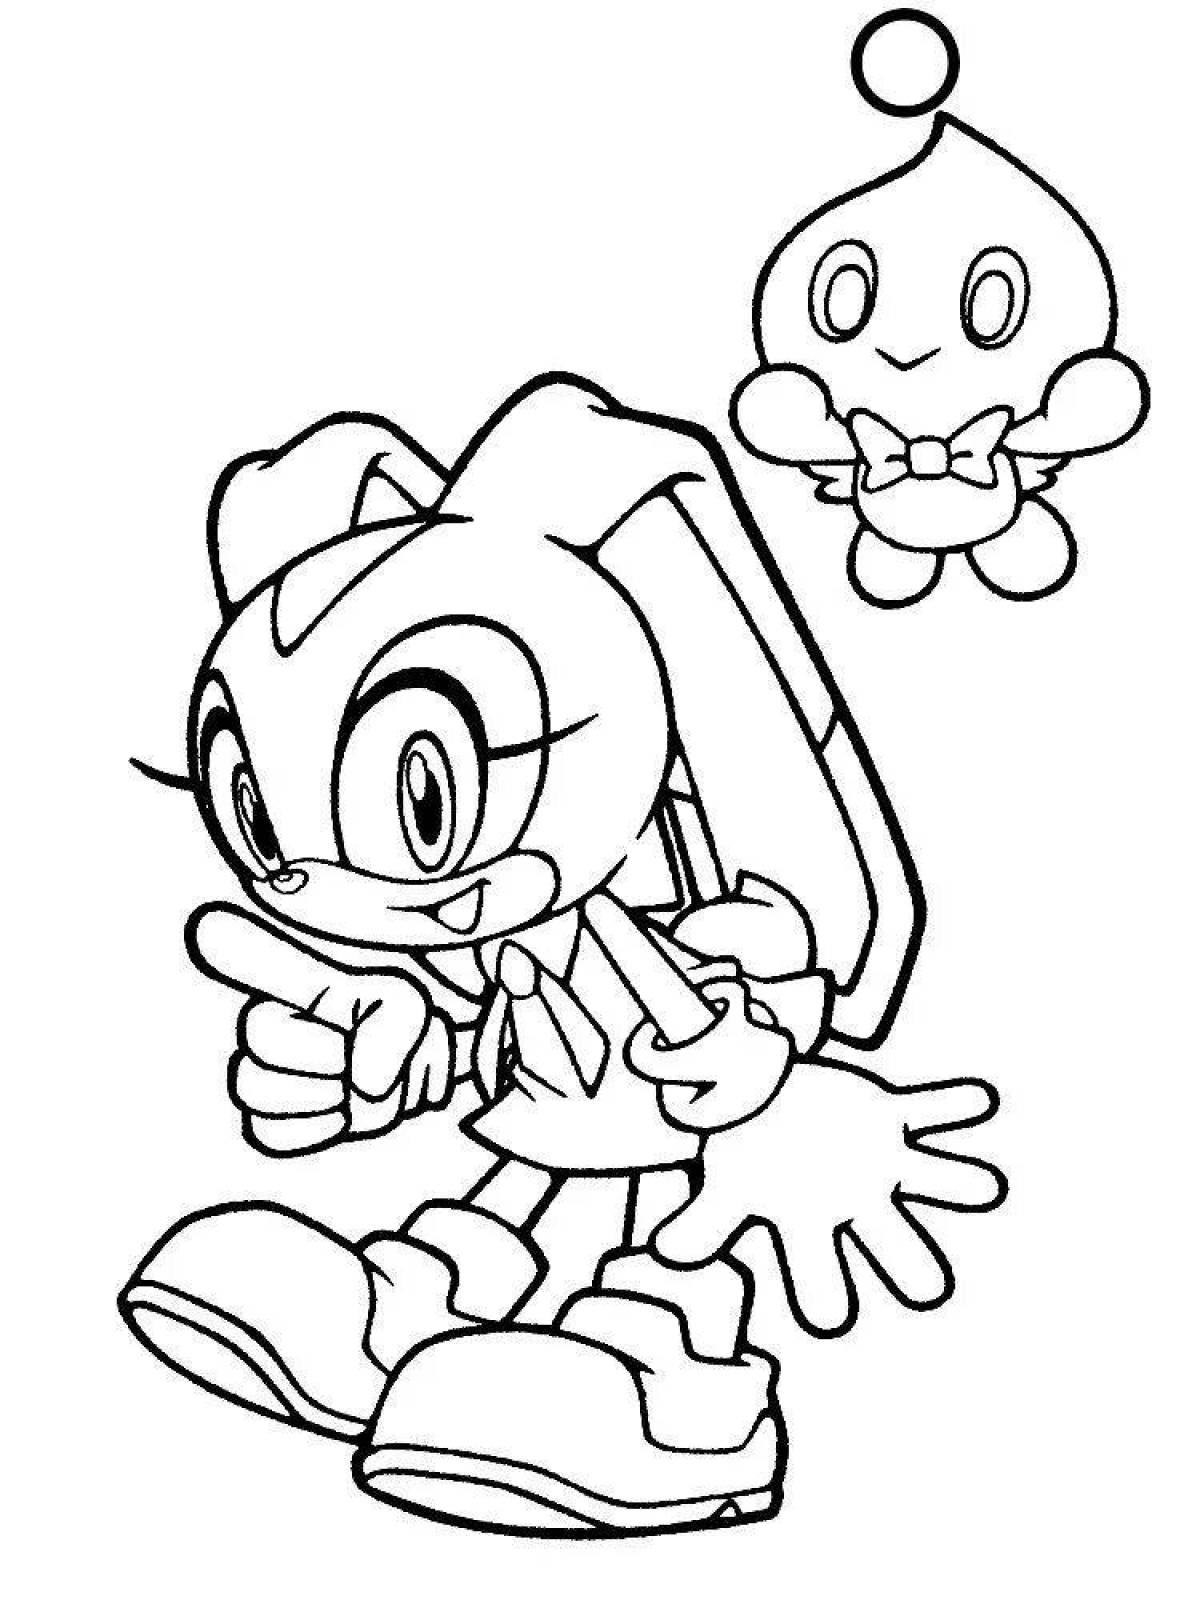 Colorful white sonic coloring page